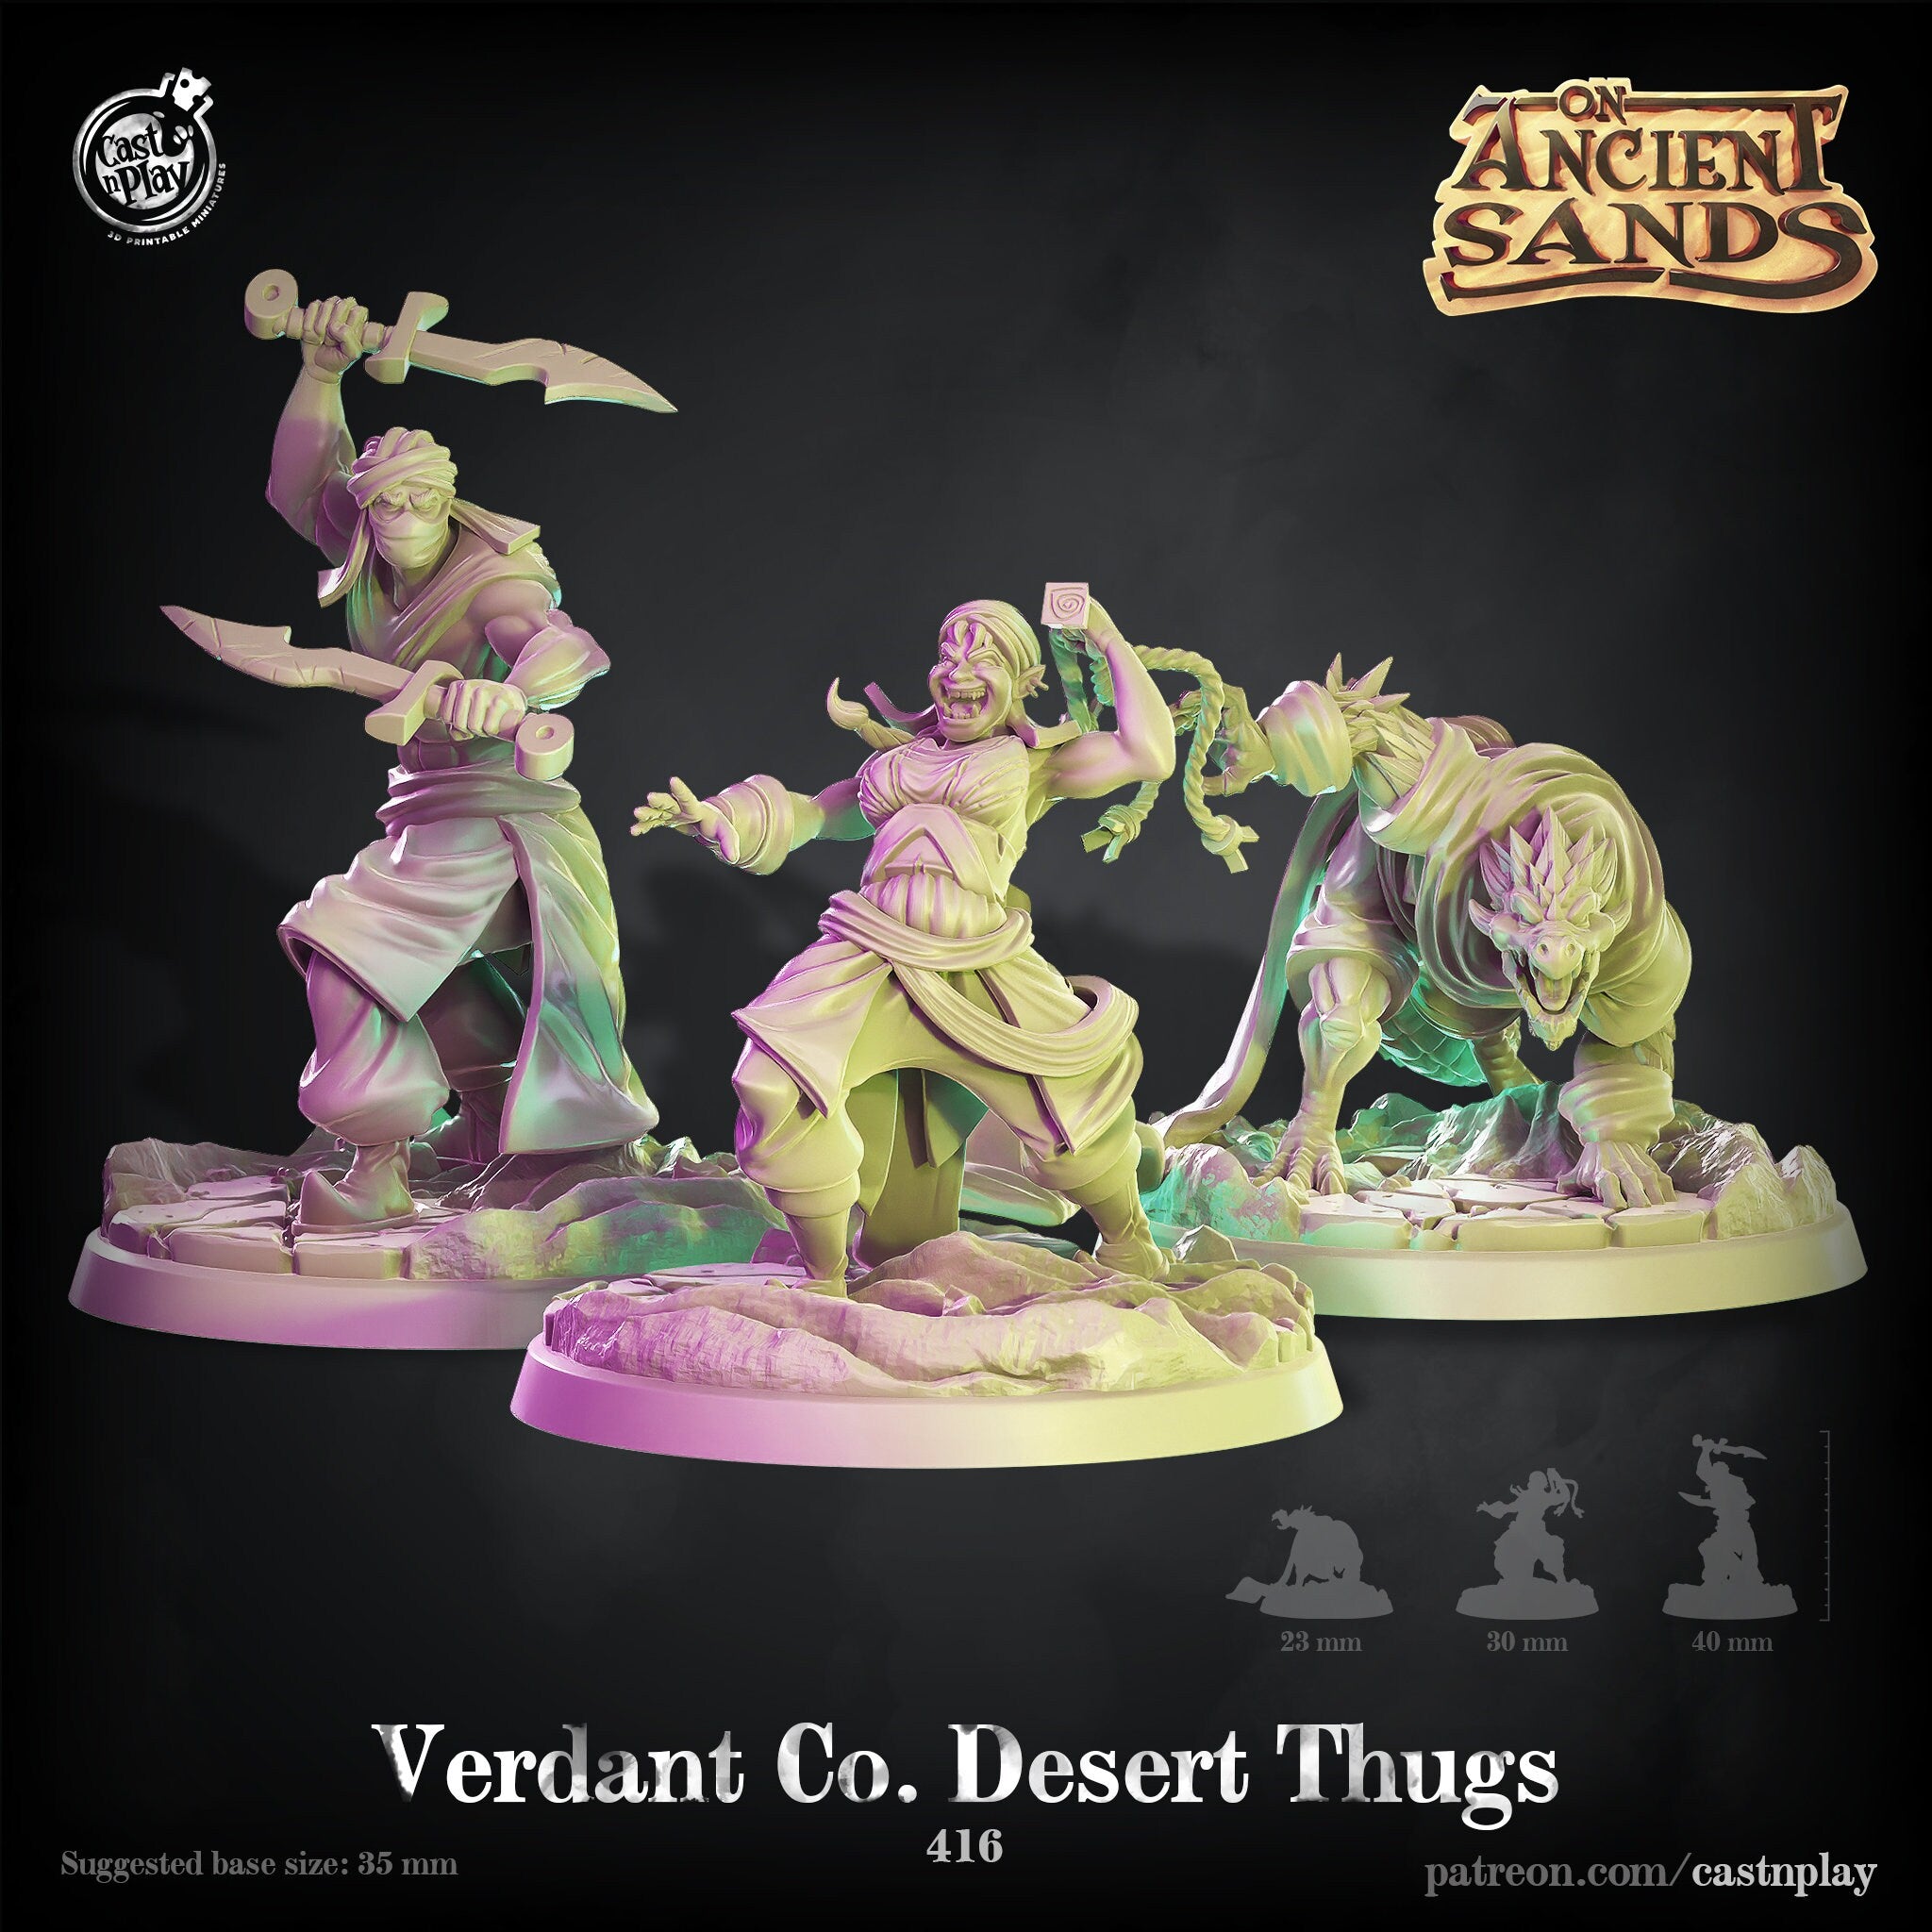 Verdant Co. Desert Thugs by Cast N Play (On Ancient Sands)